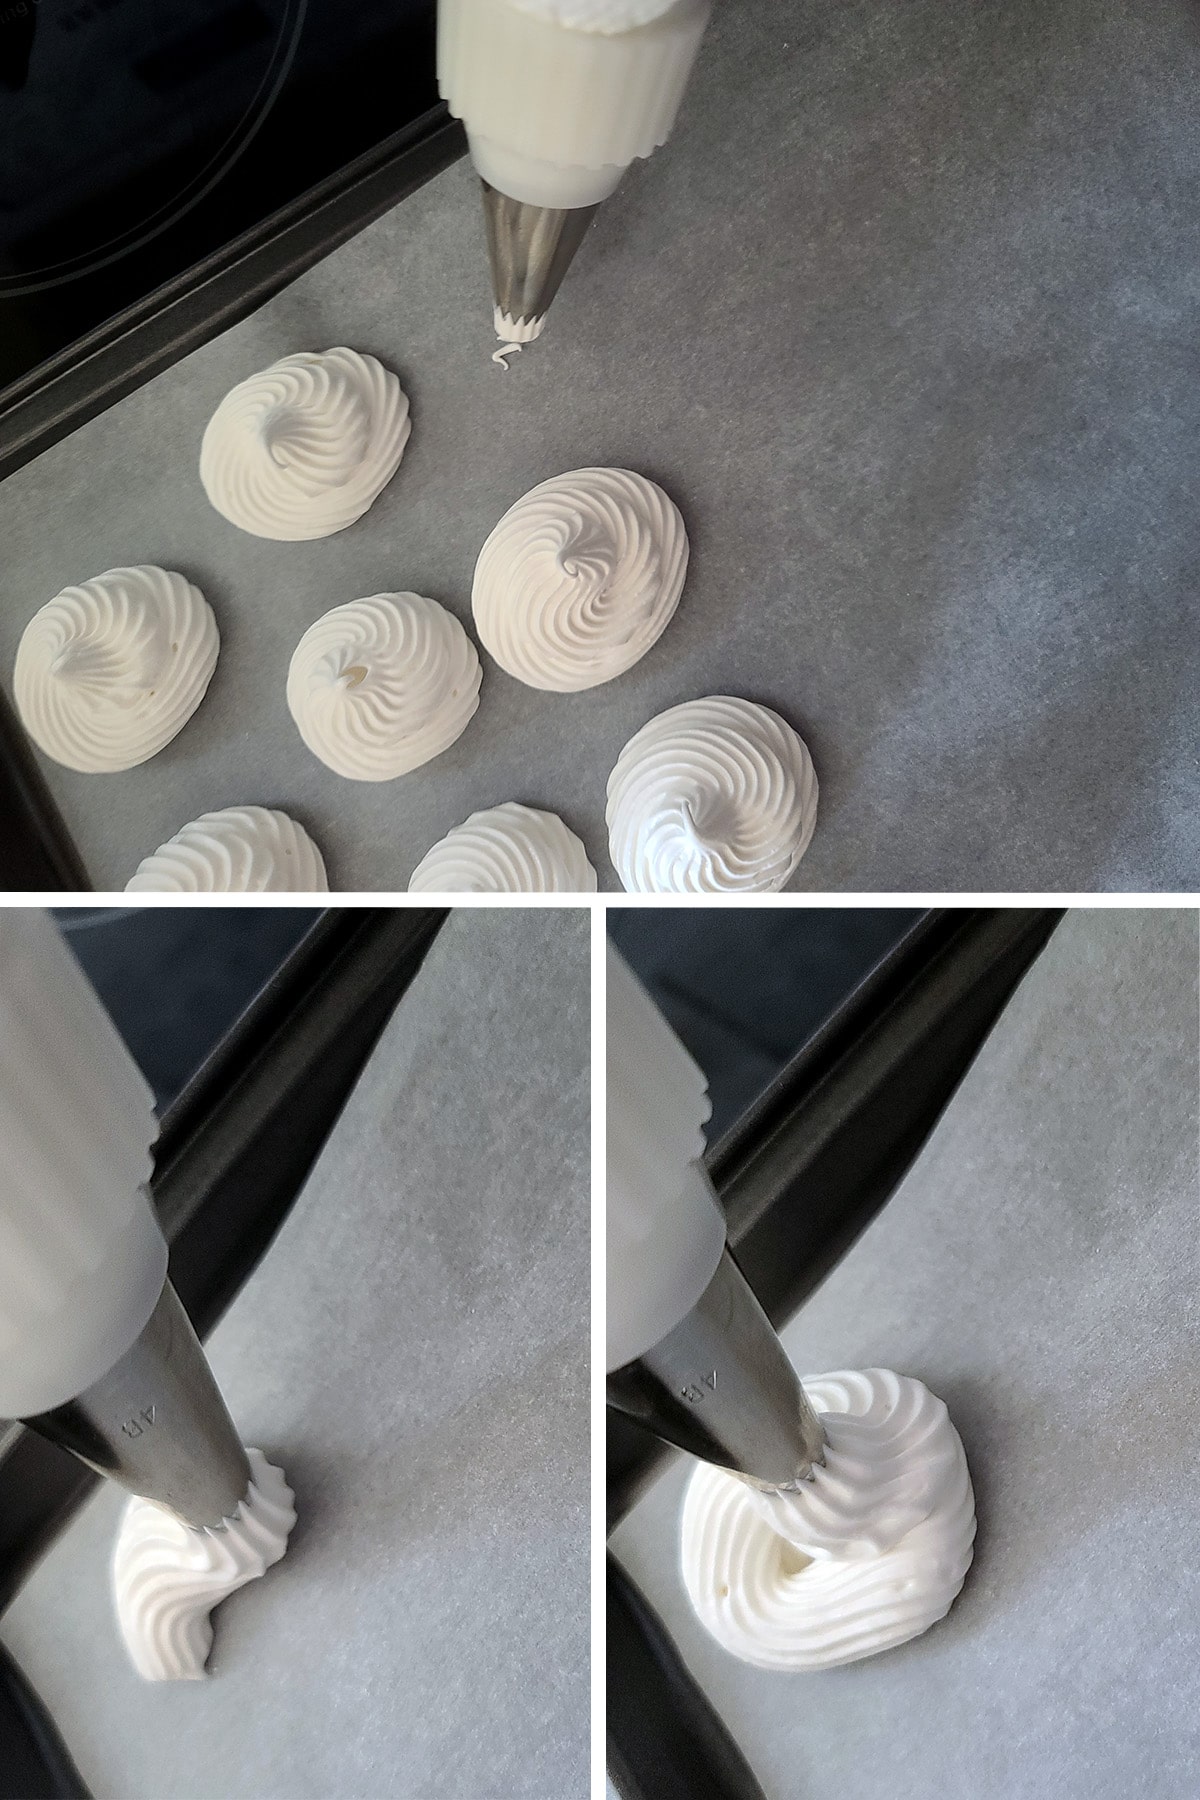 A 3 part image showing swirls of meringue being piped on parchment lined baking sheets.